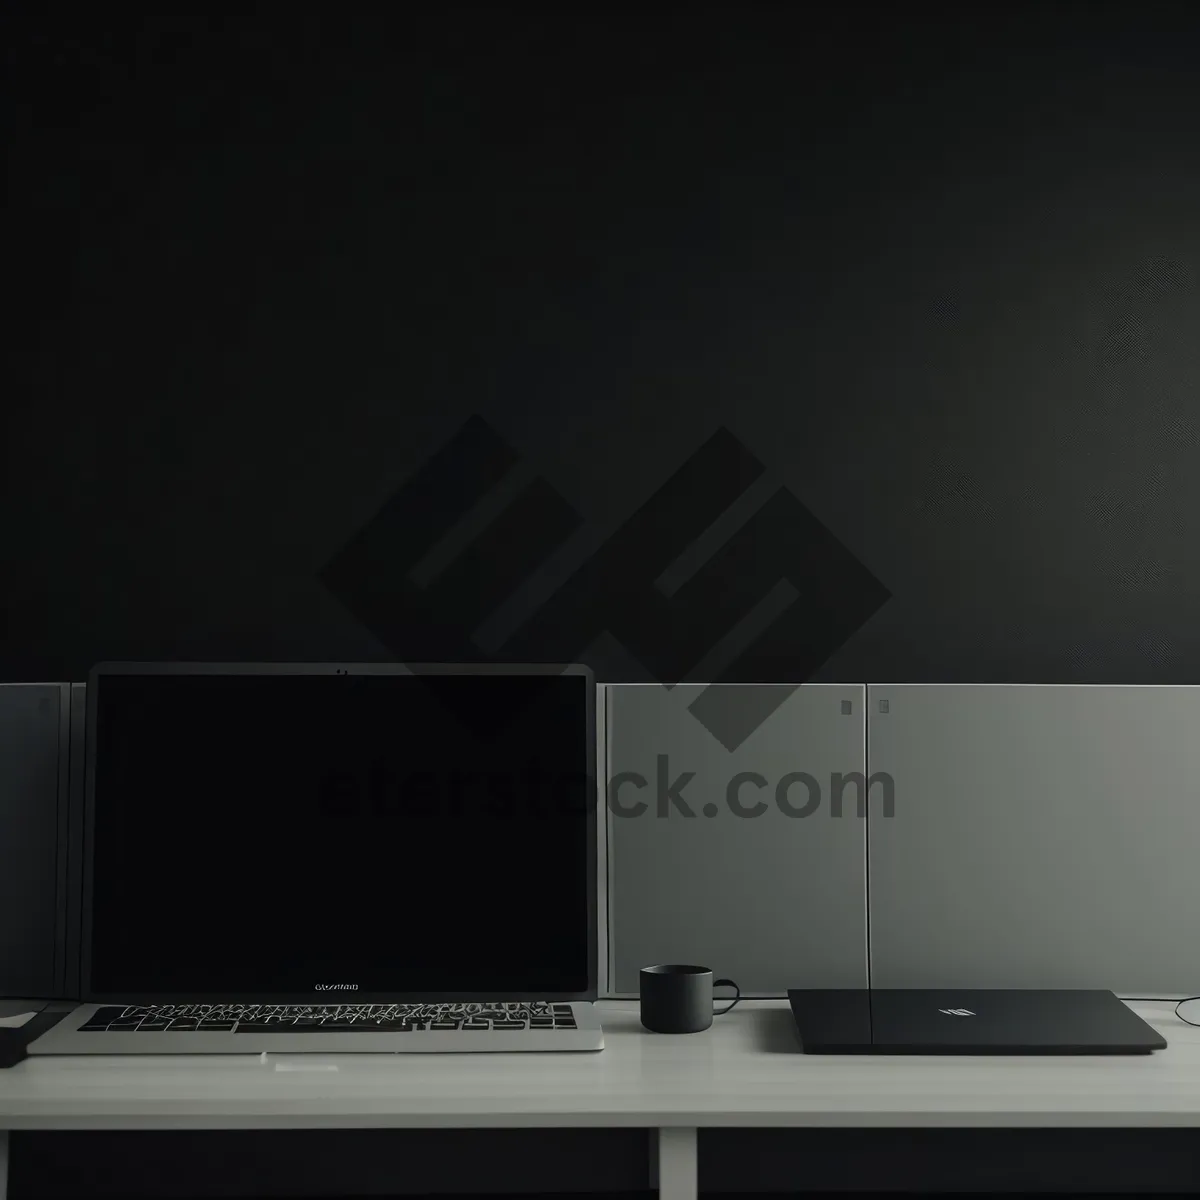 Picture of Modern Business Laptop Screen on Silver Desk